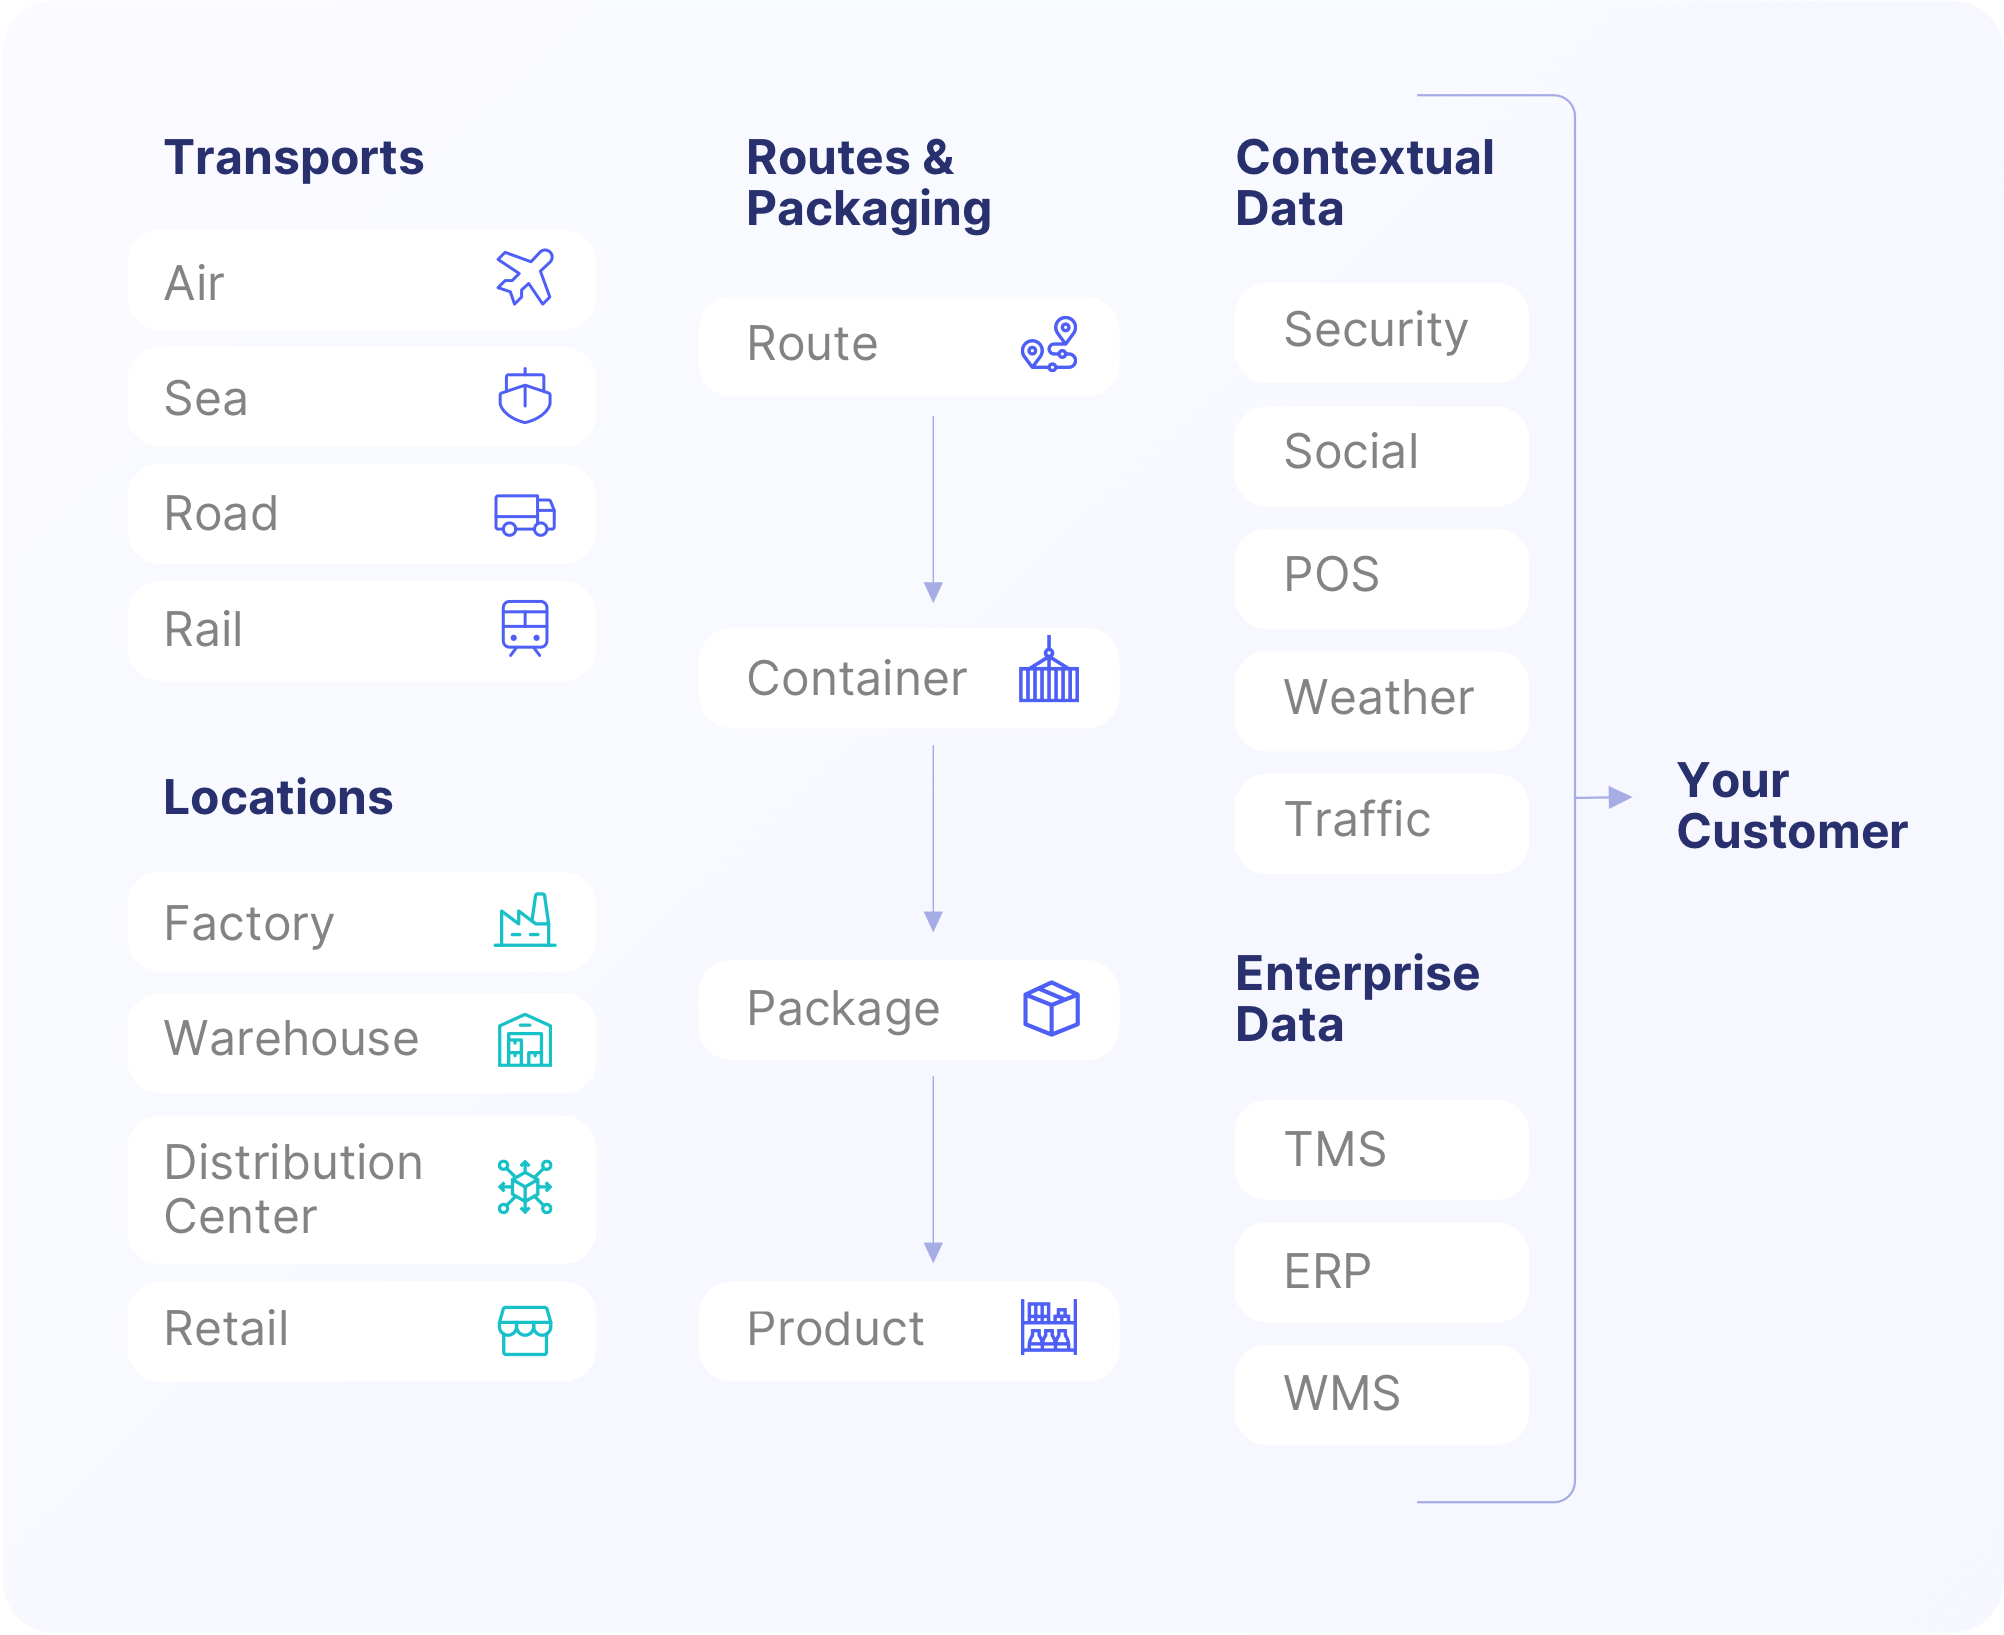 Map key with icons for Transports, Locations, Routes & Packages, Contextual Data and Enterprise Data